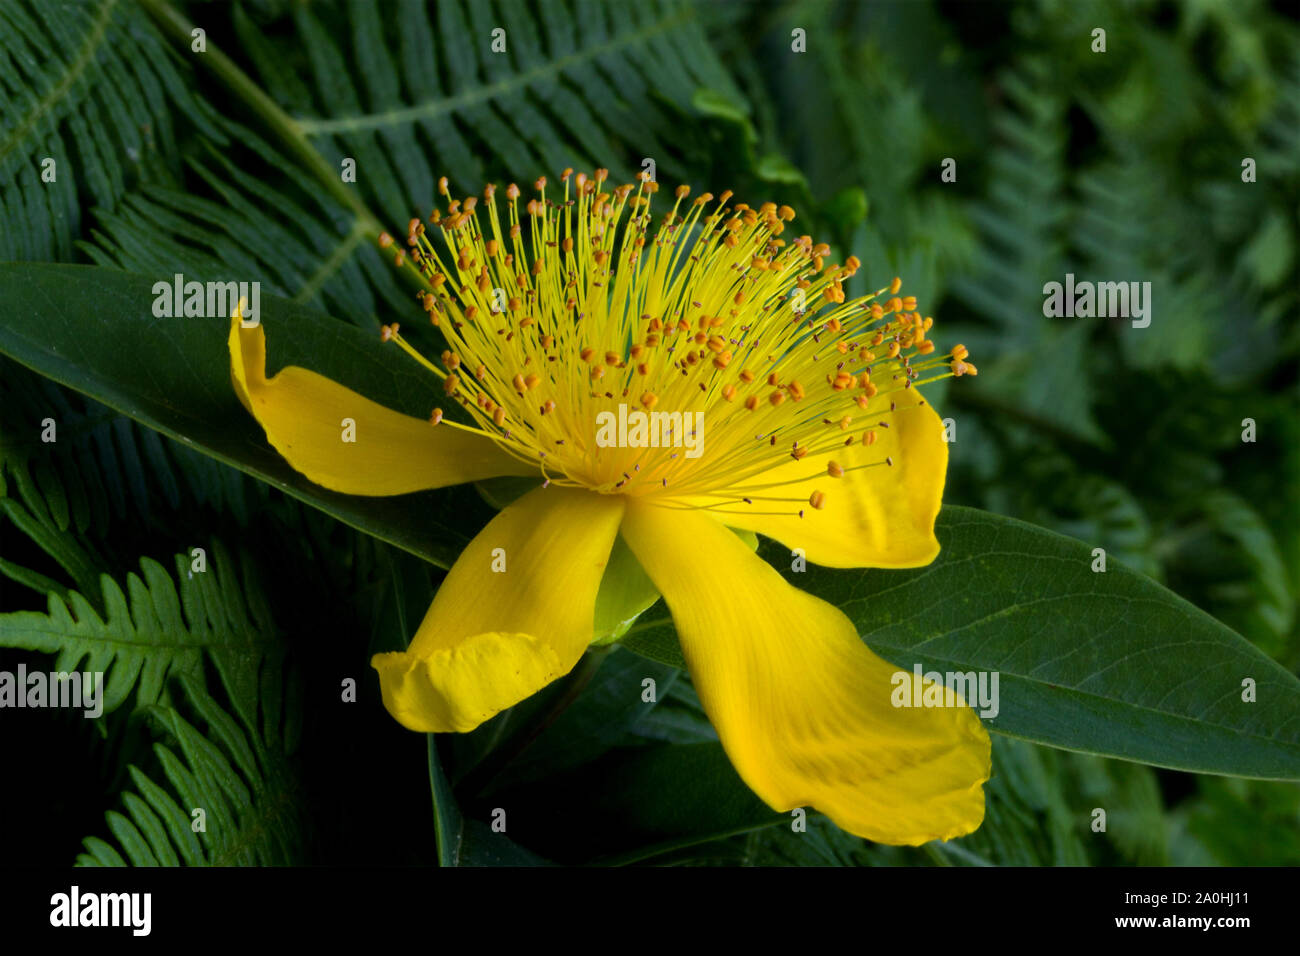 Close up of Tutsan - Hypericum Androsaemum flower between fern leaves. Also known as sweet-amber plant. Stock Photo